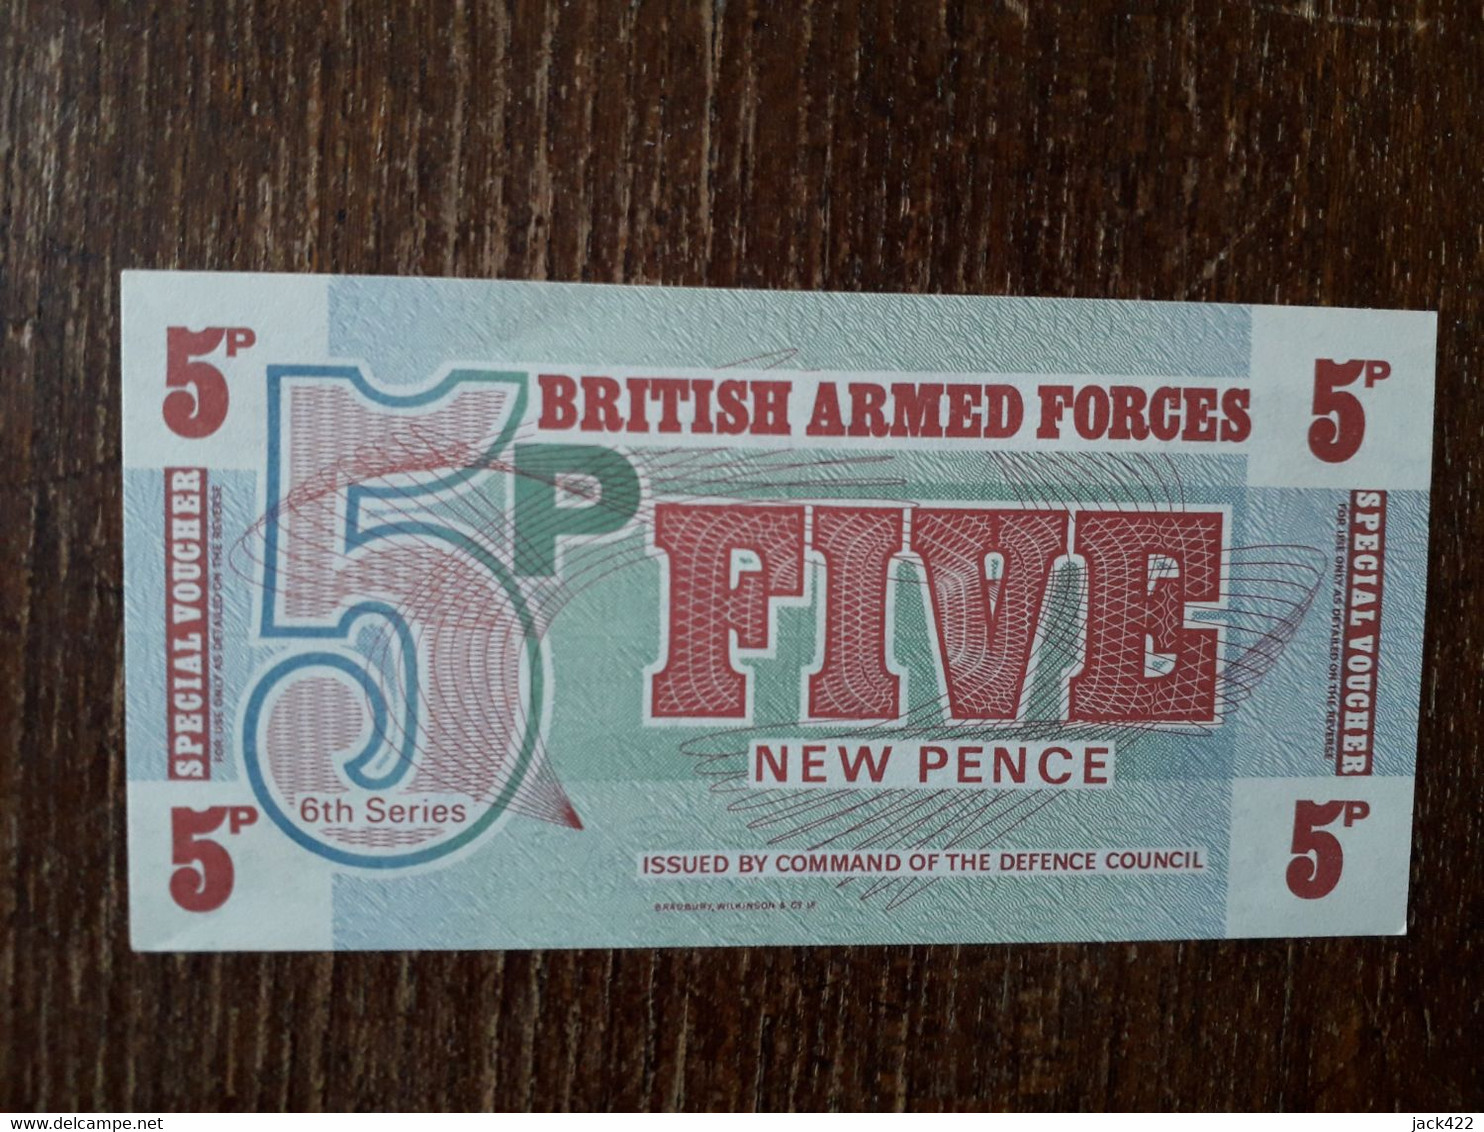 L39/60 BILLET 5 NEW PENCE . BRITISH ARMED FORCES - British Armed Forces & Special Vouchers